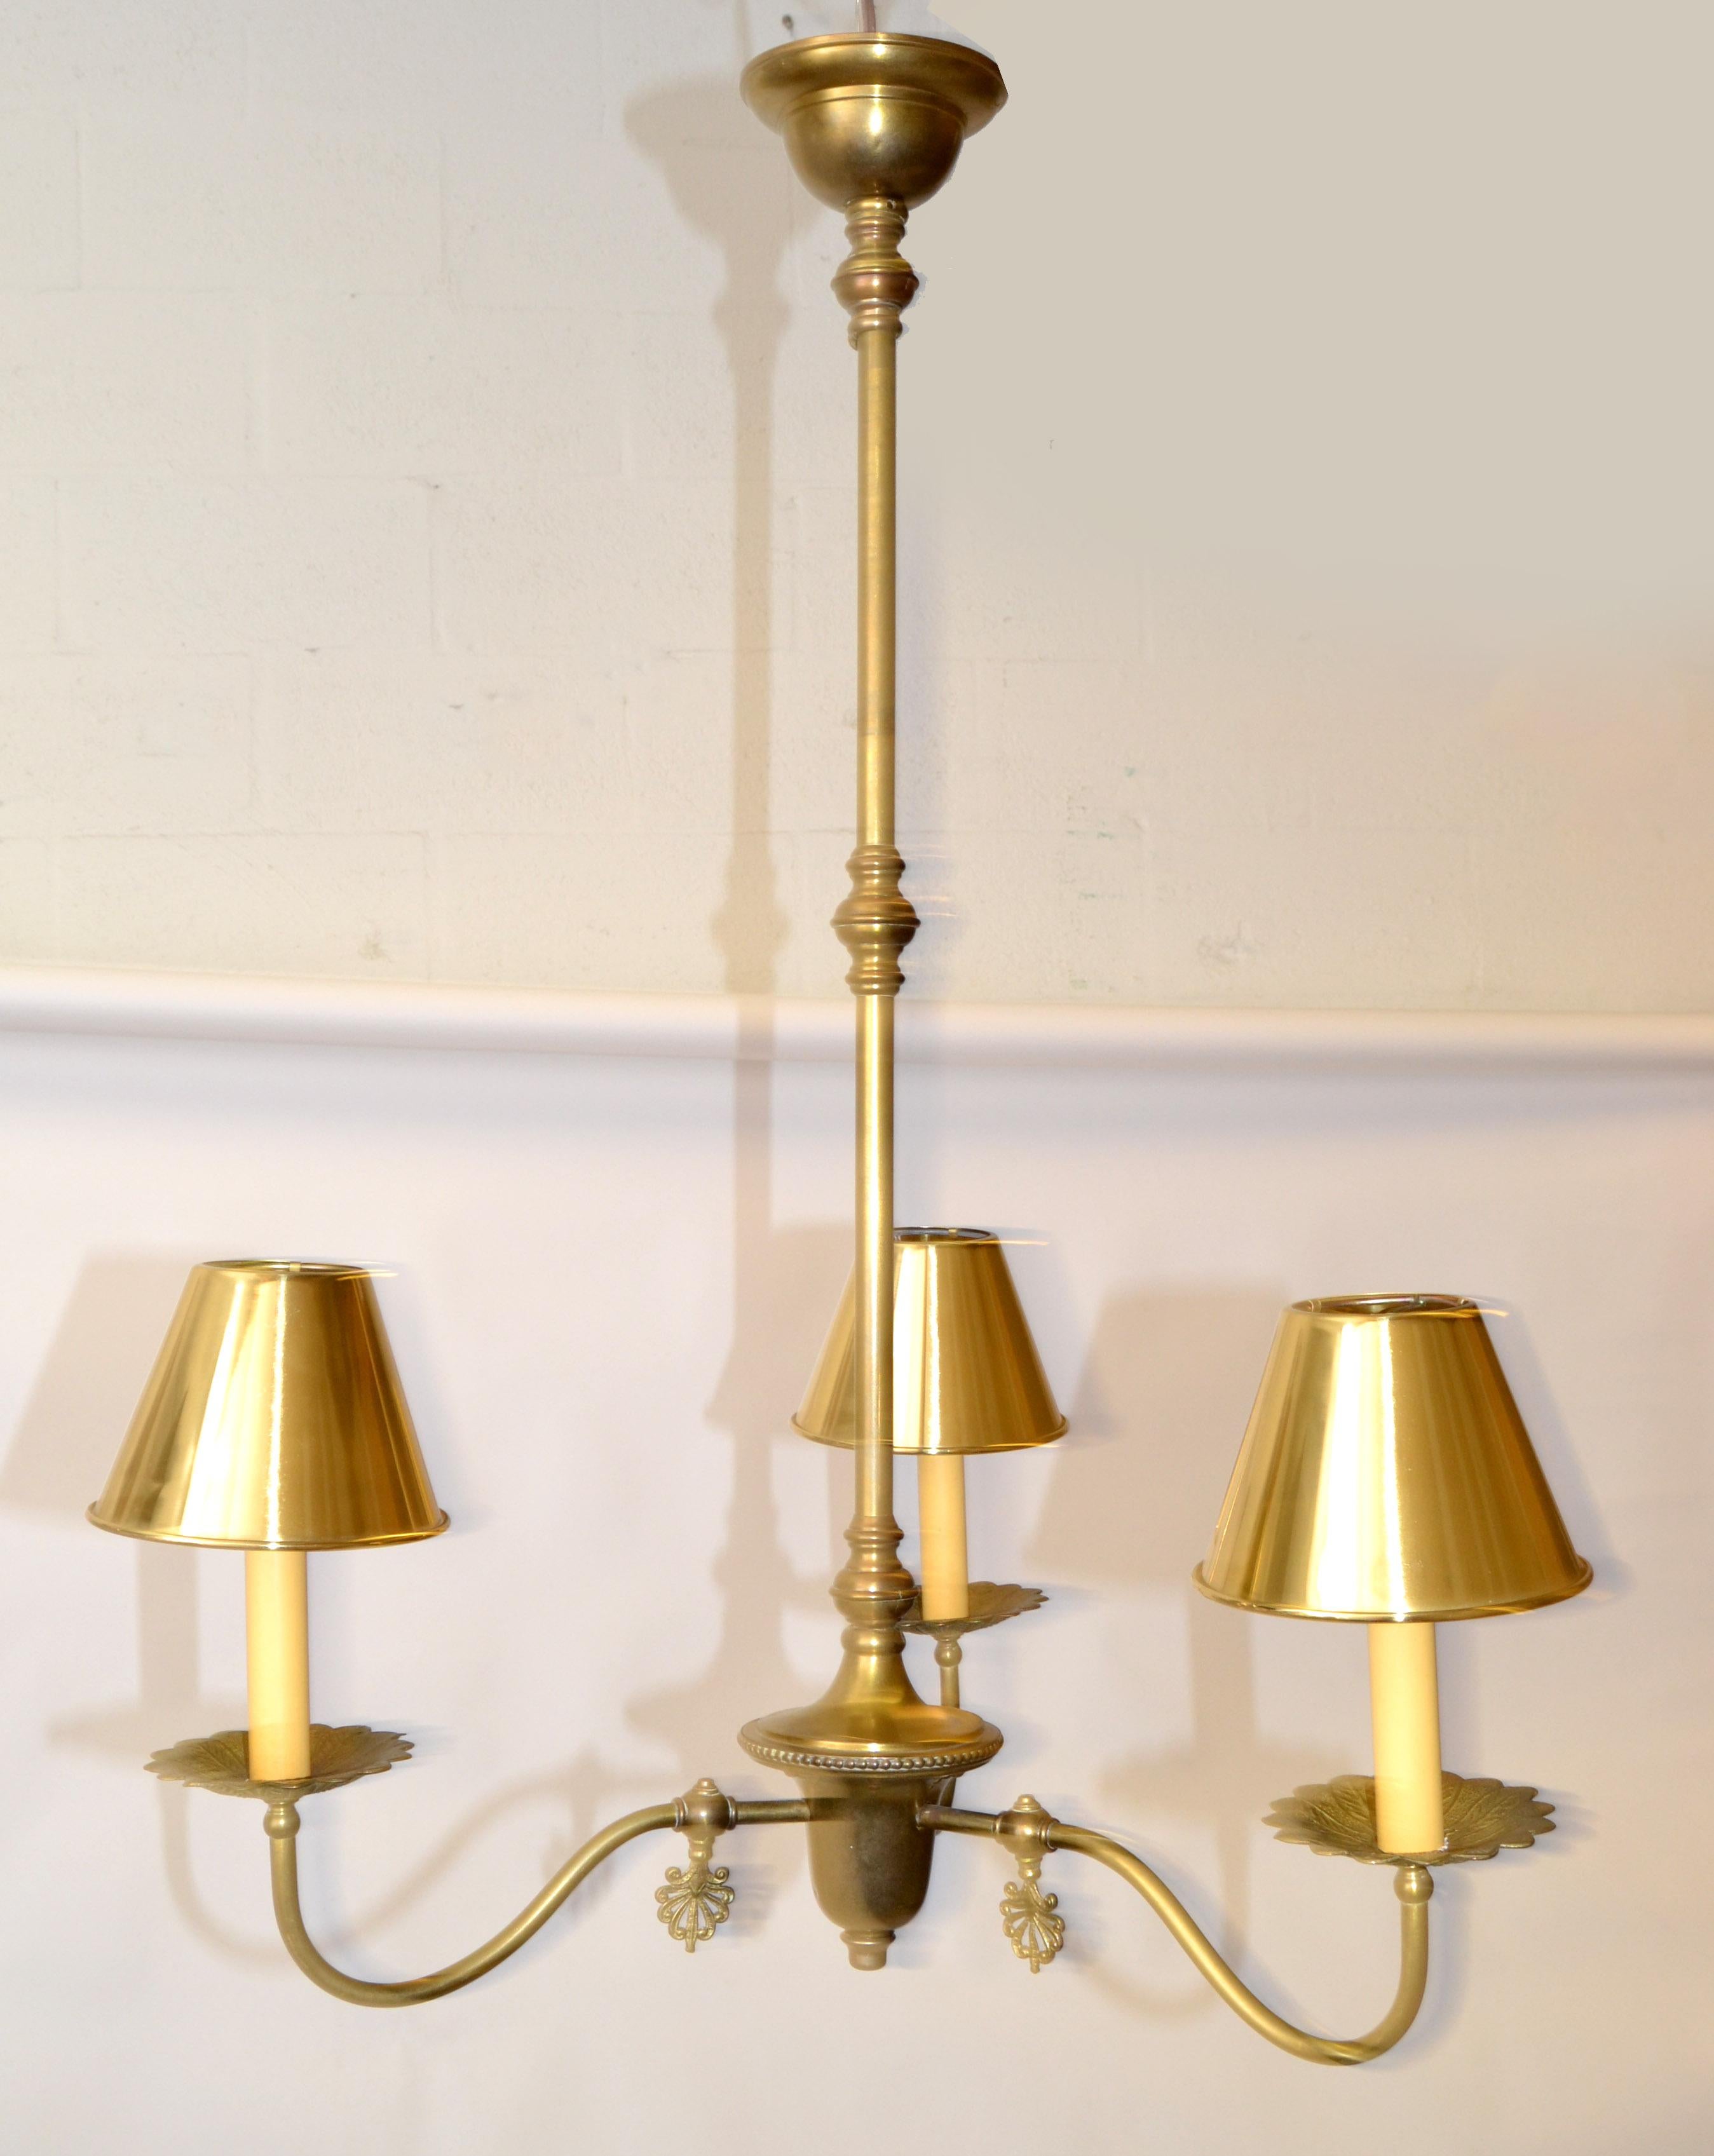 French Neoclassical 3 Arm Pendant Light Chandelier with Brass Clip-On Shades 50s For Sale 8